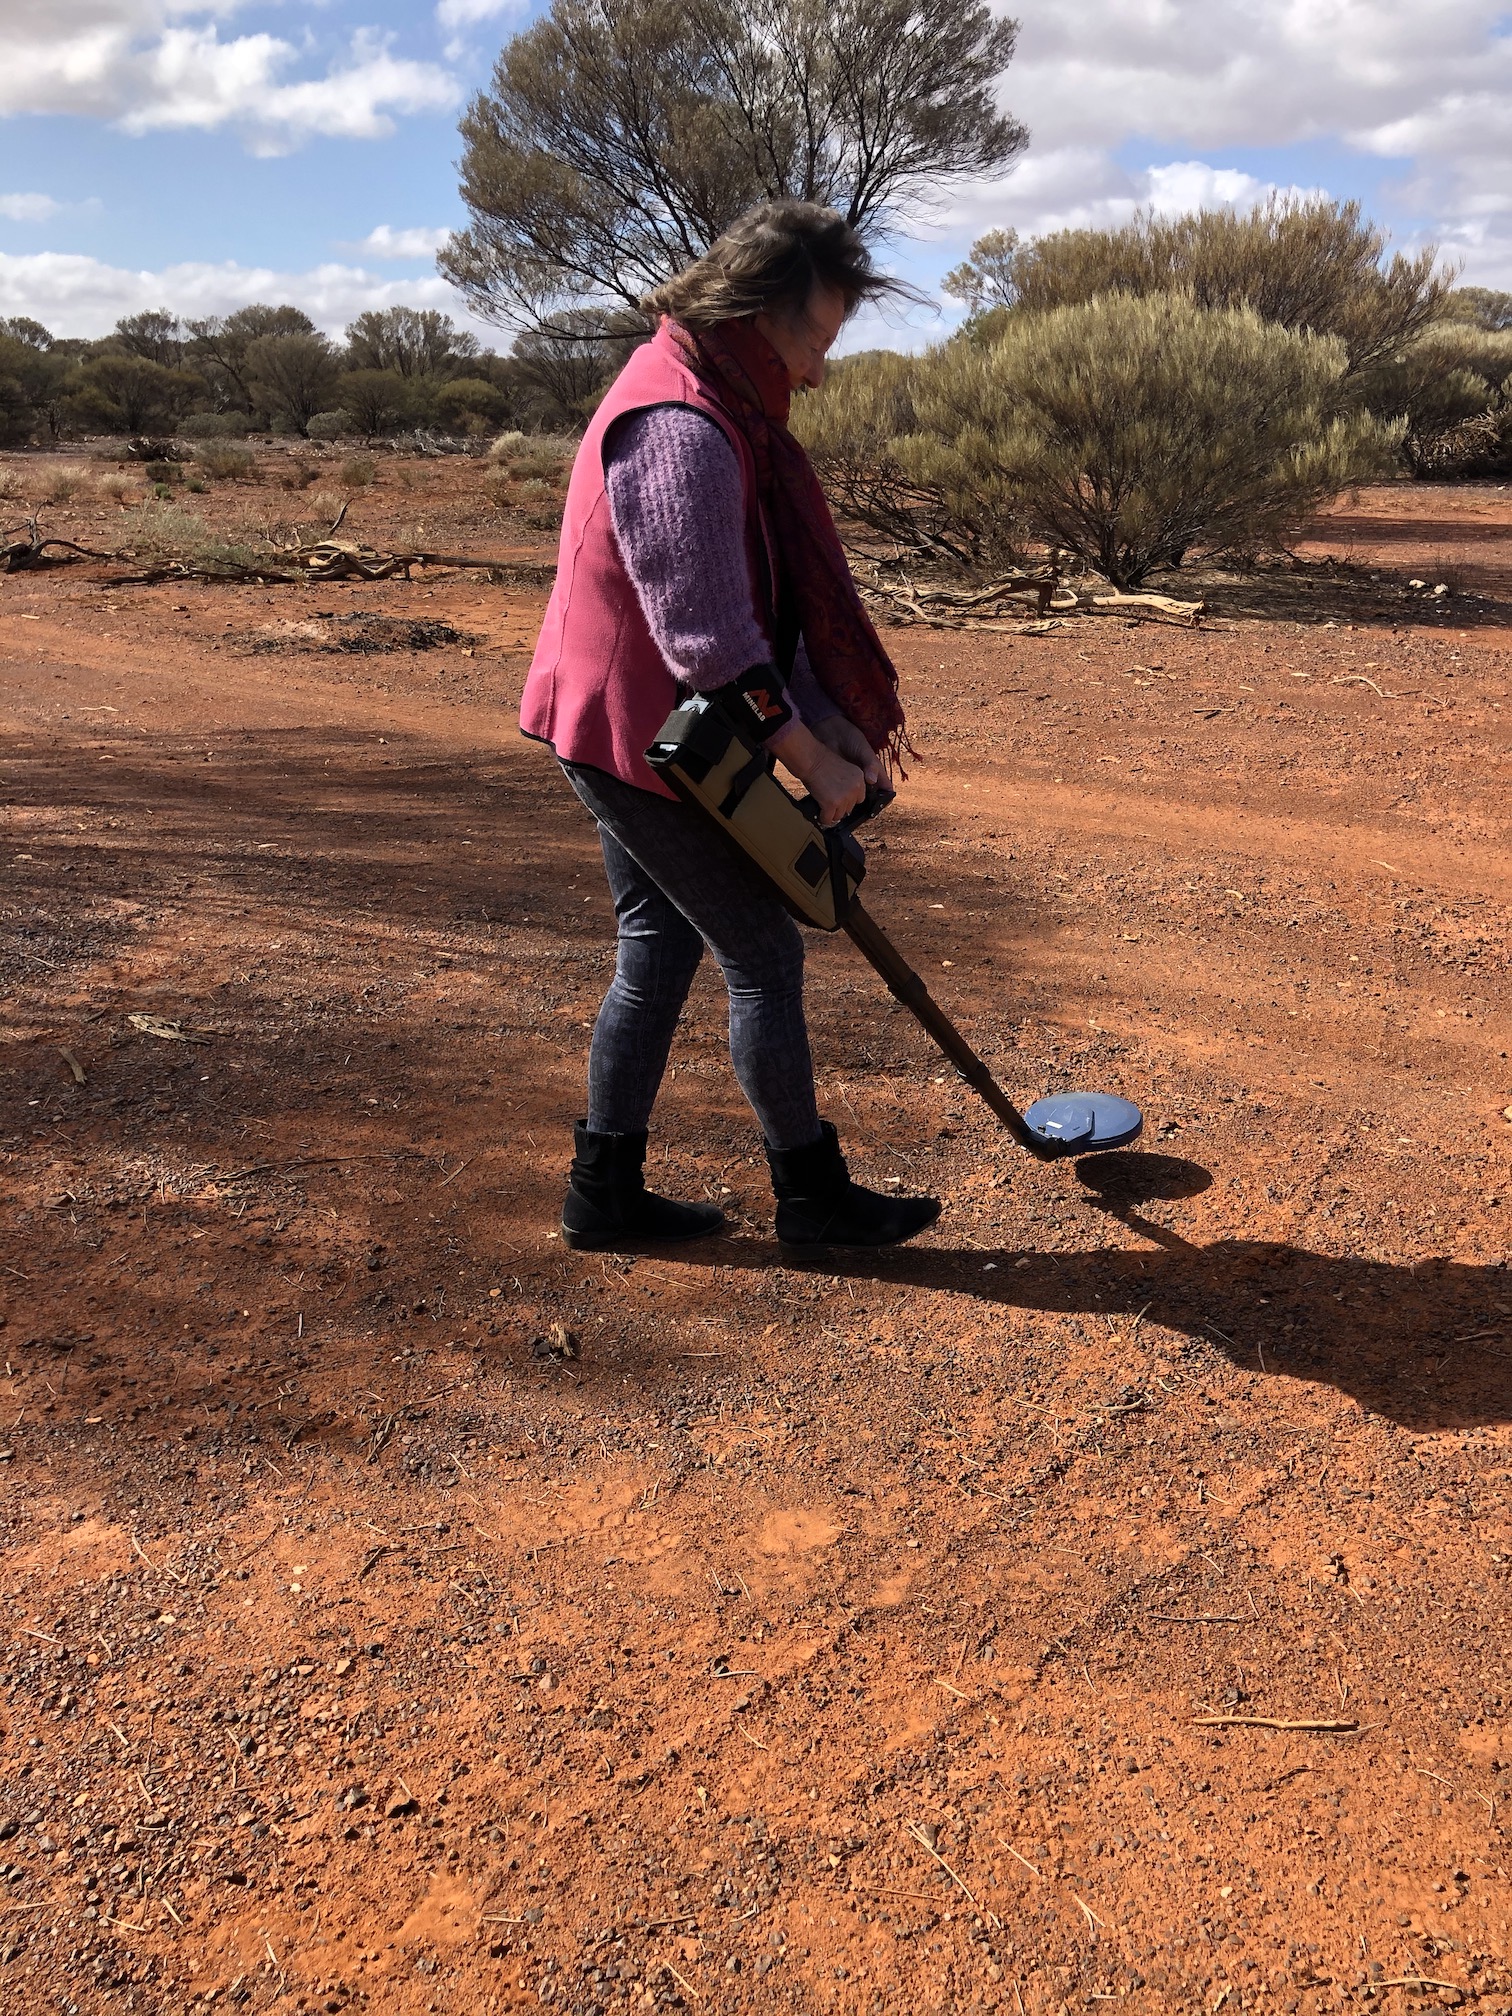 2020-06-29  Prospecting near Mt Magnet - but no gold found